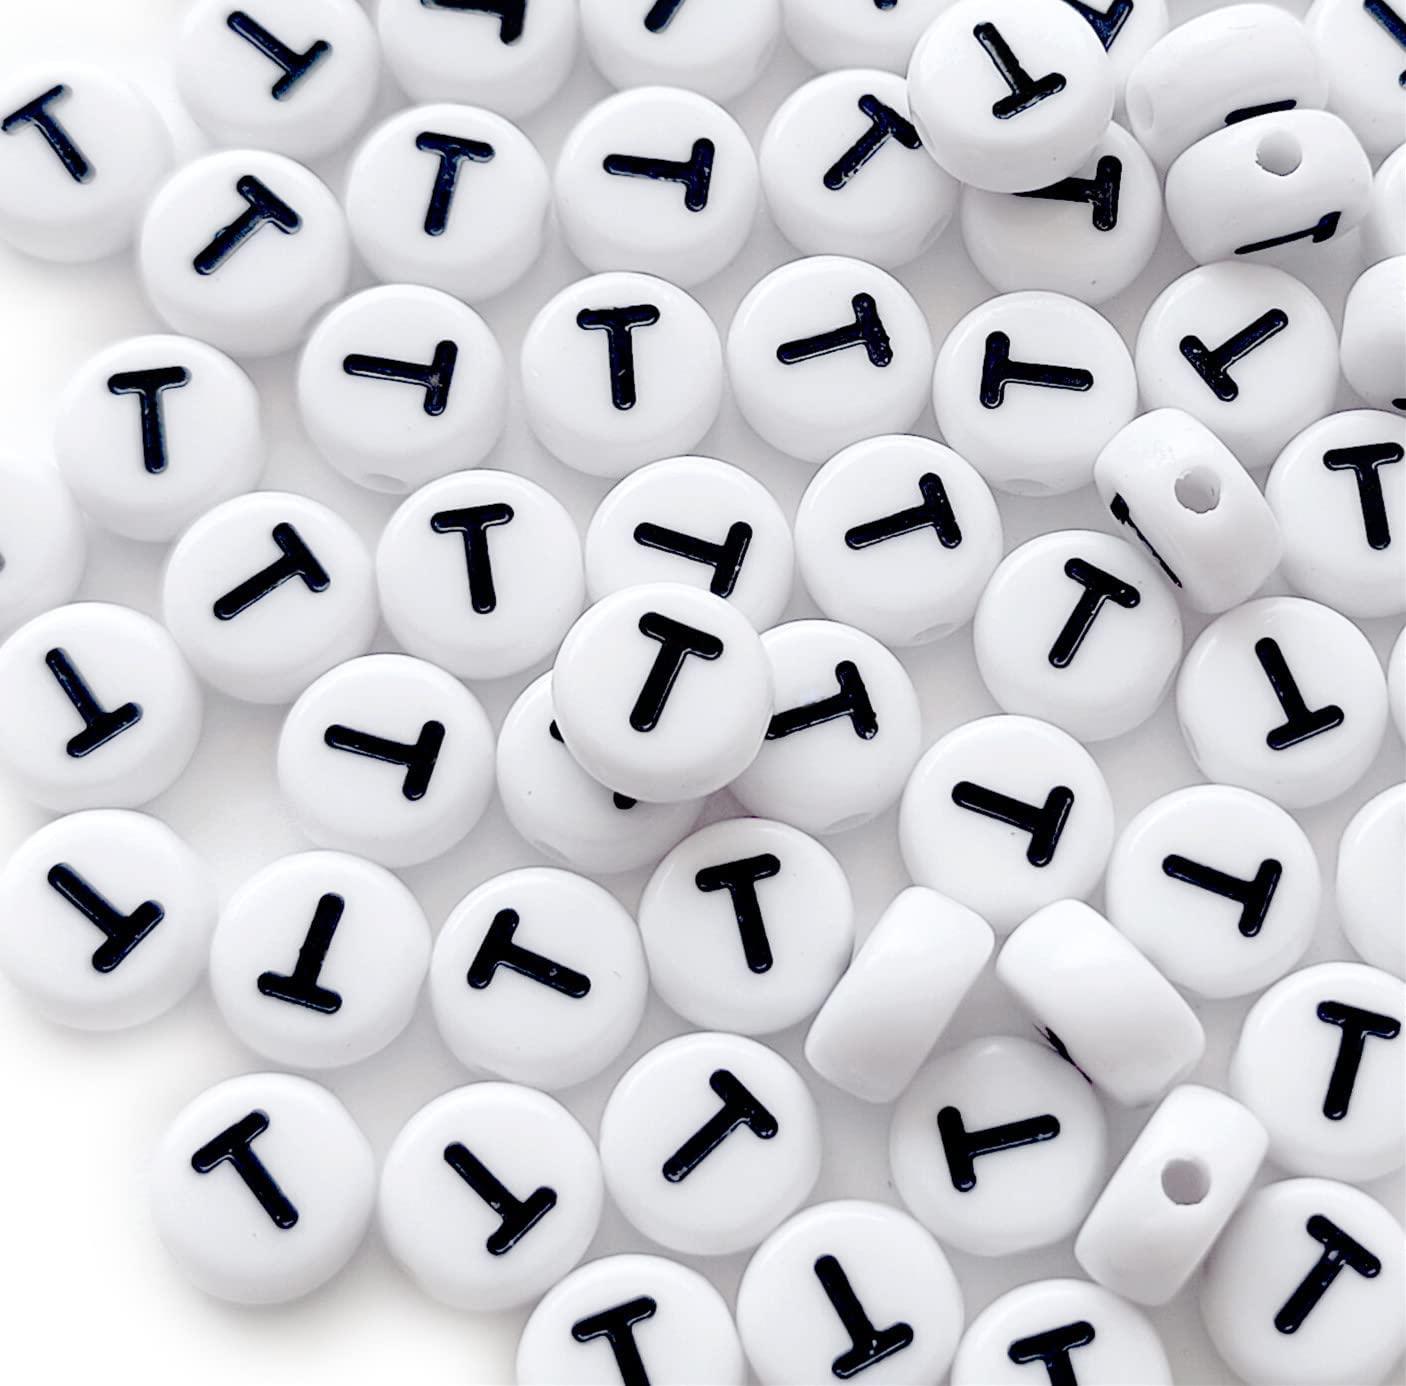 Bxwoum 100pcs Letter Beads White Round Acrylic Alphabet Beads Letter D Beads for Jewelry Making Bracelets Necklaces Key Chains DIY 4x7mm